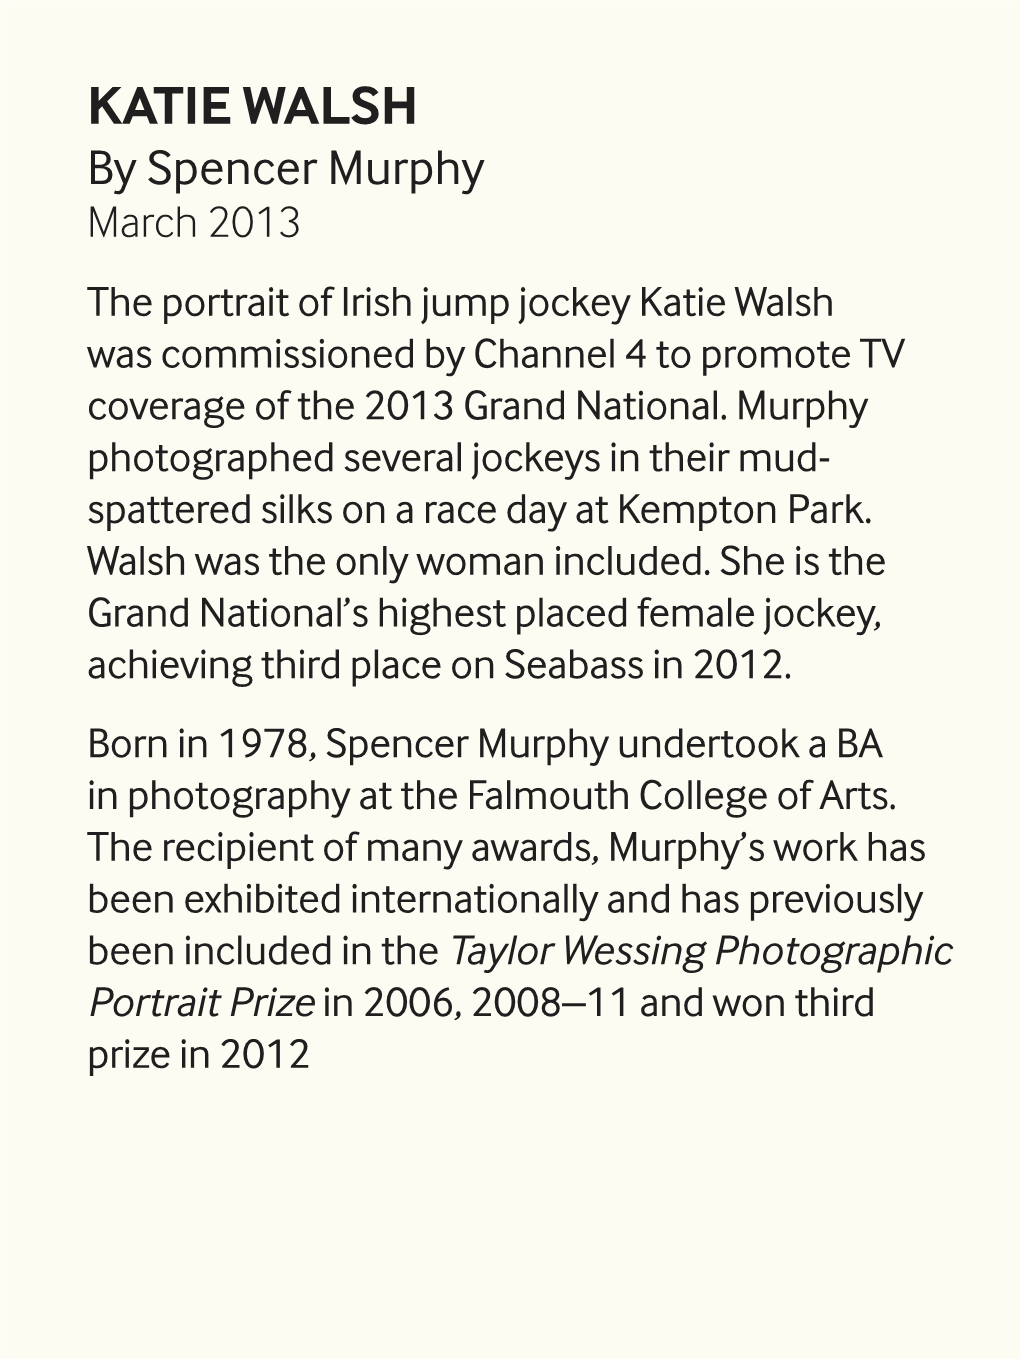 KATIE WALSH by Spencer Murphy March 2013 the Portrait of Irish Jump Jockey Katie Walsh Was Commissioned by Channel 4 to Promote TV Coverage of the 2013 Grand National